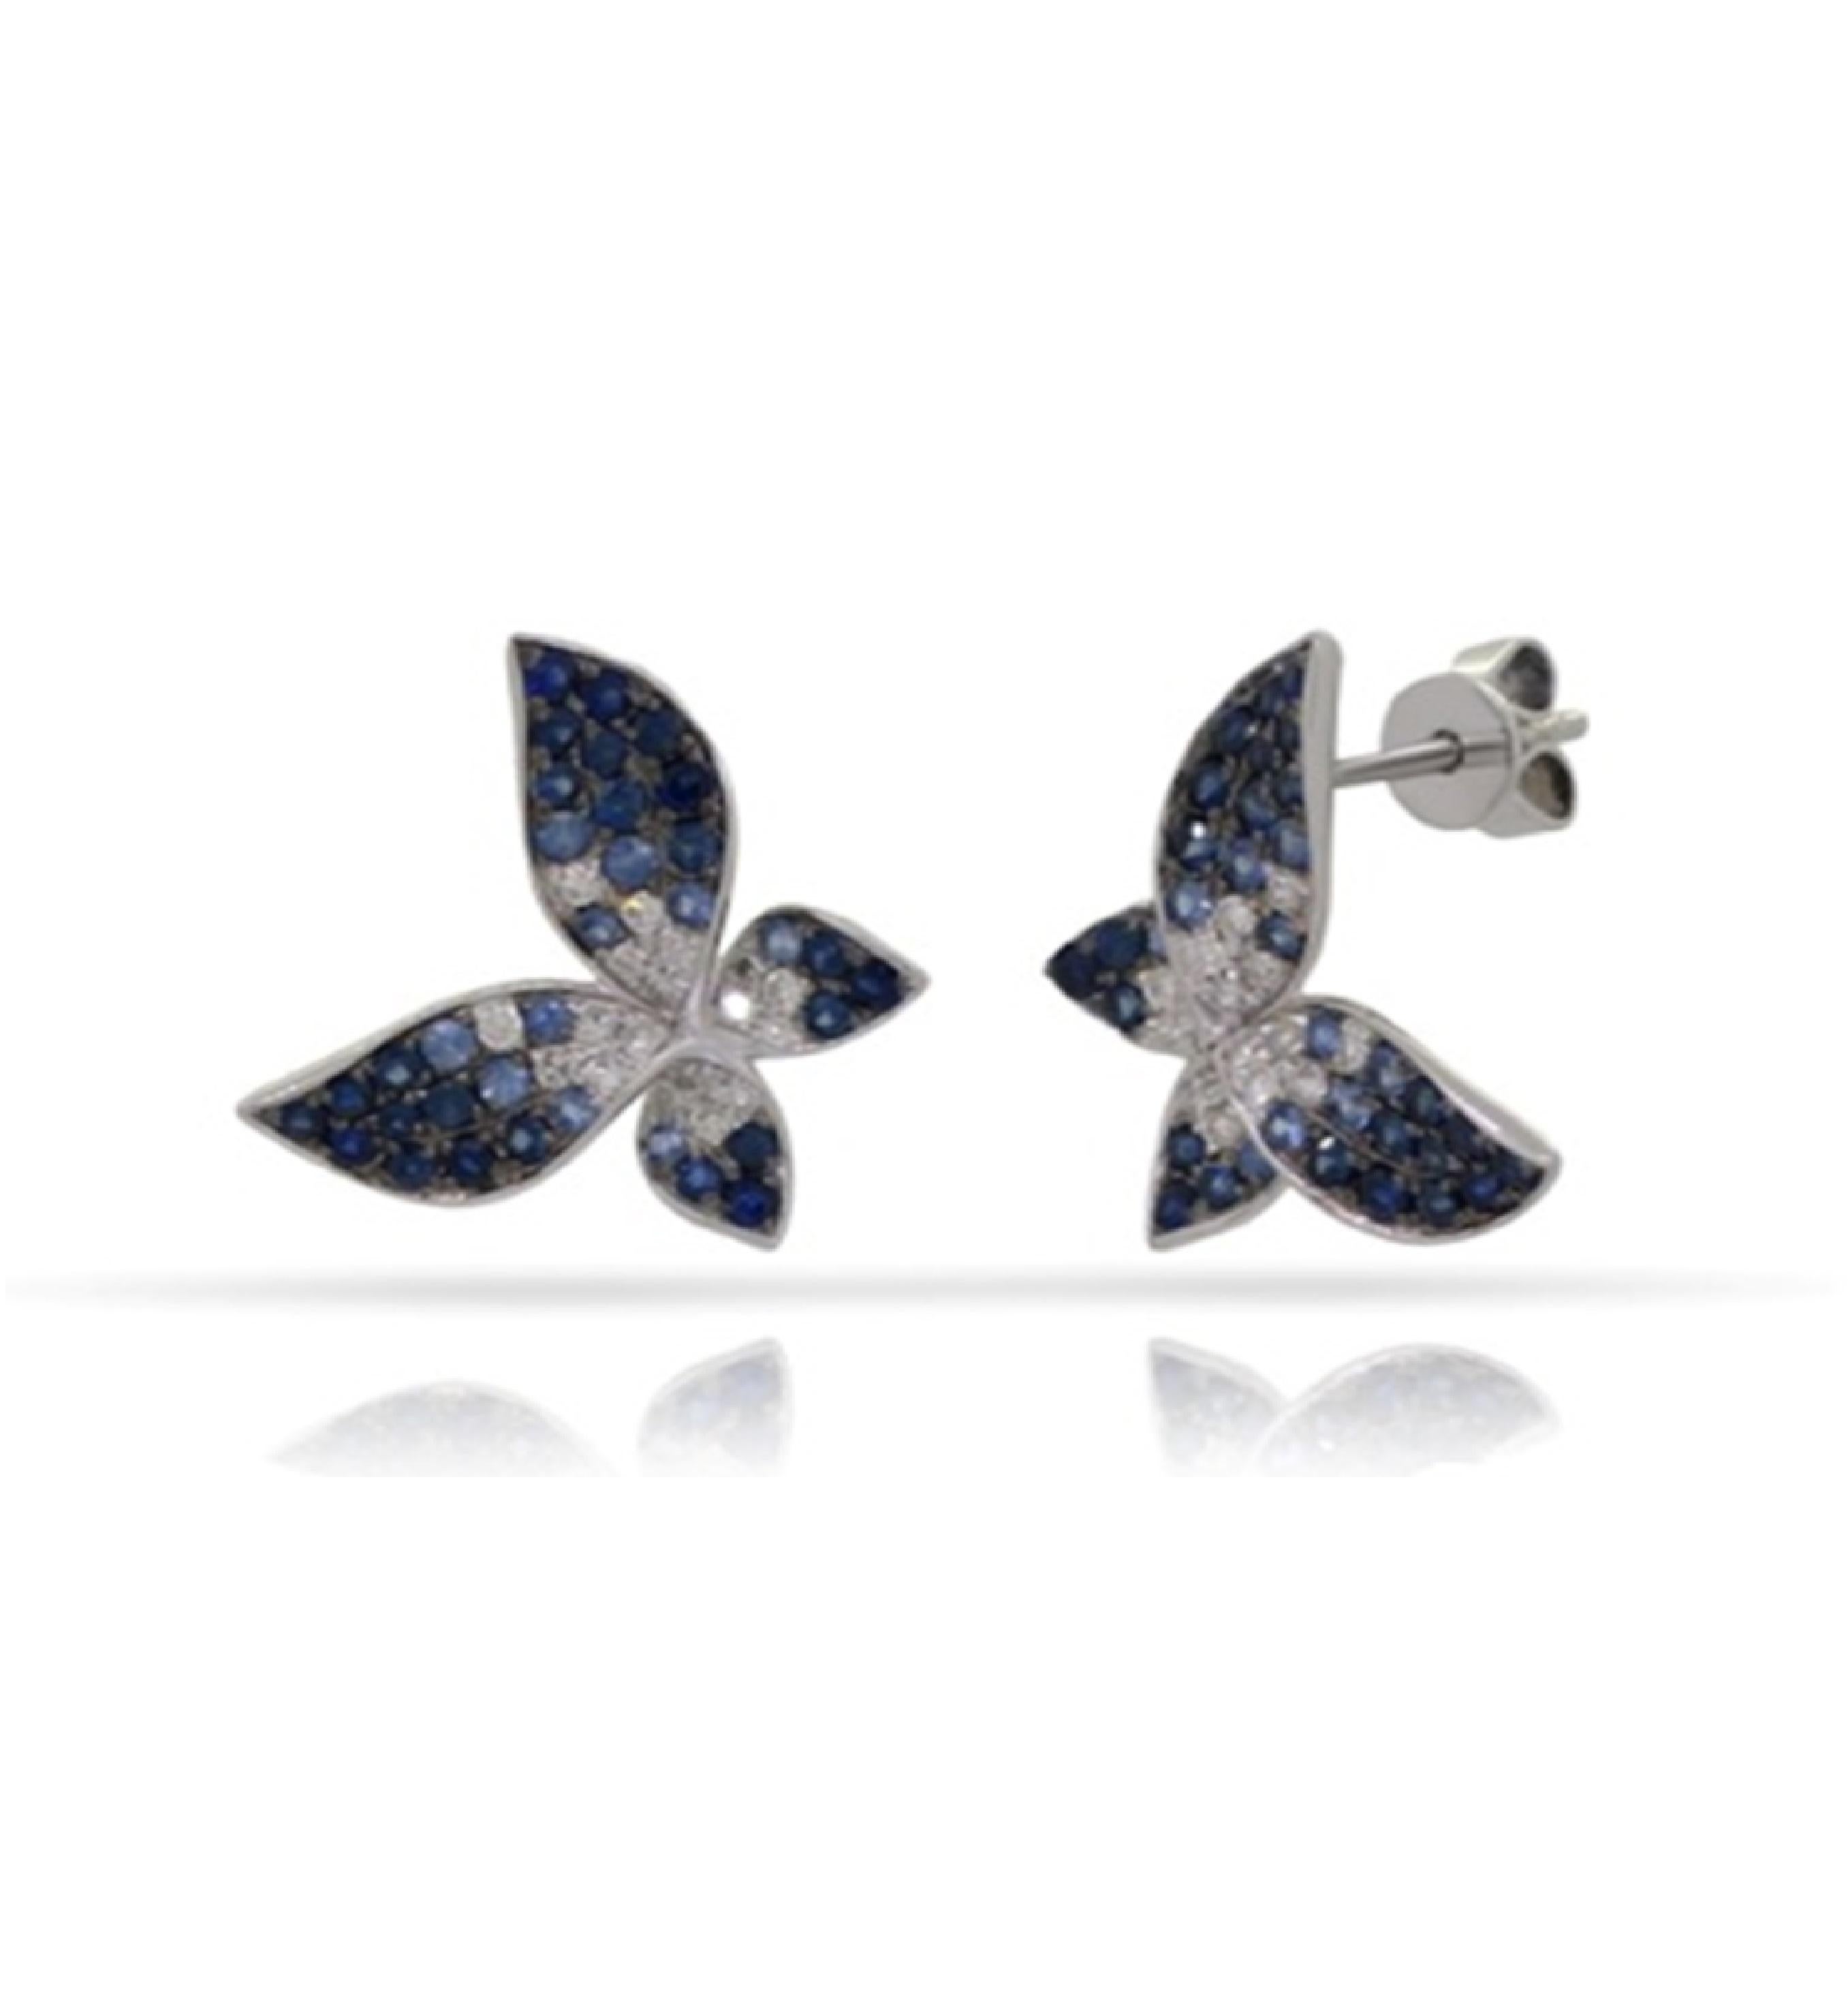 14K White Gold Sapphire And Diamond Earrings featuring 0.17 Carat T.W. Diamonds and 0.71 Carats T.W. of Sapphires

Underline your look with this sharp 14K White Gold Diamond and Sapphire Earrings. High quality Diamonds  and sapphires . This Earrings